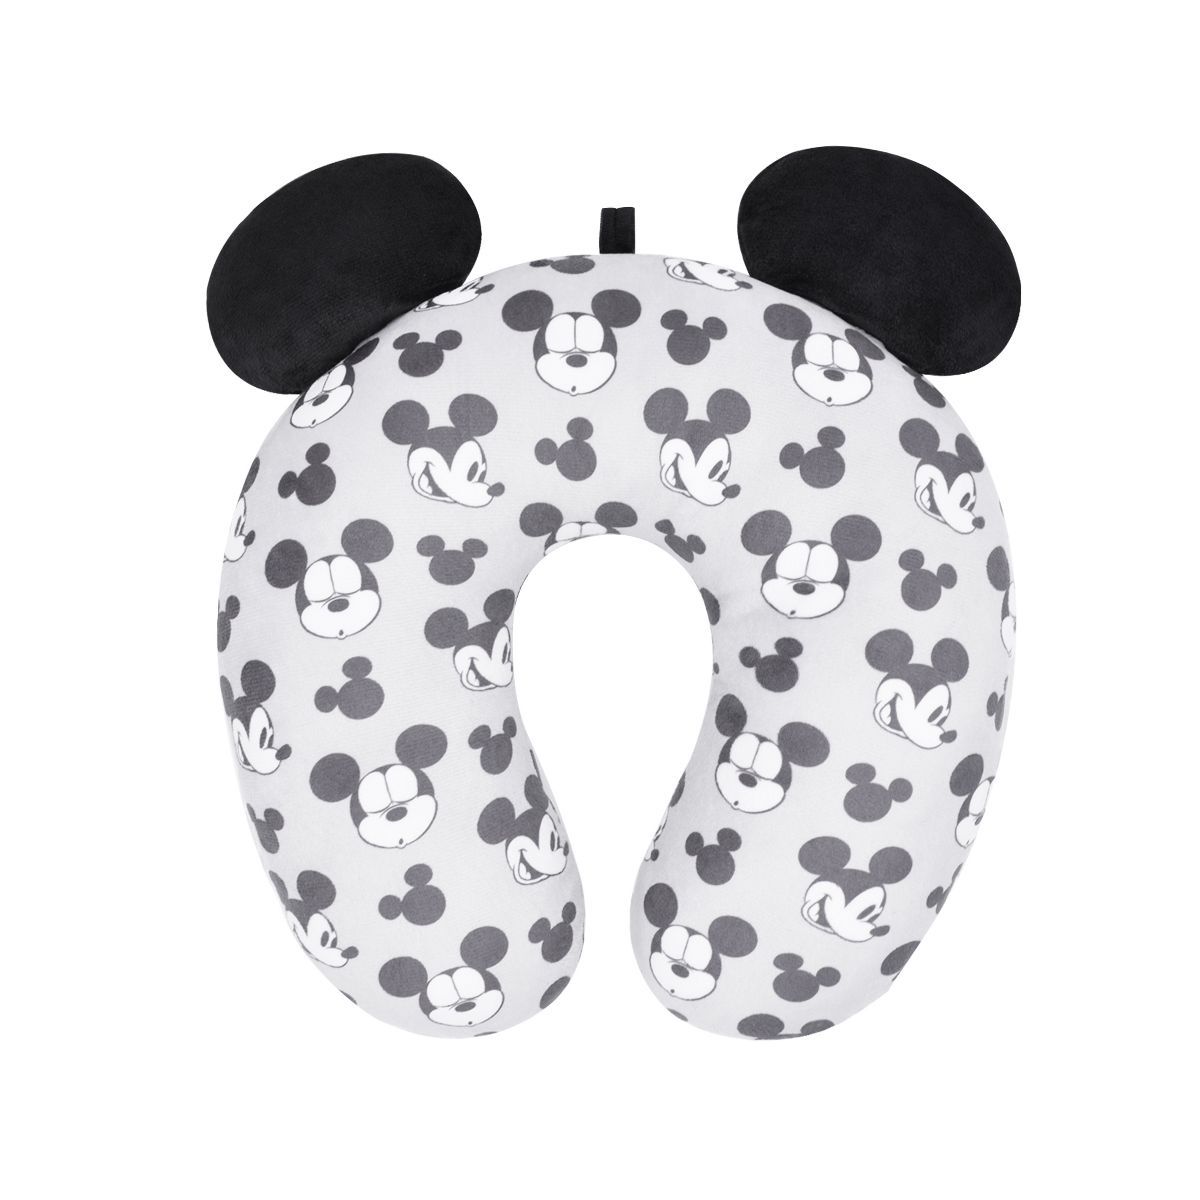 Ful Disney Mickey Mouse Faces and Icons Portable Travel Neck Pillow, Grey | Target